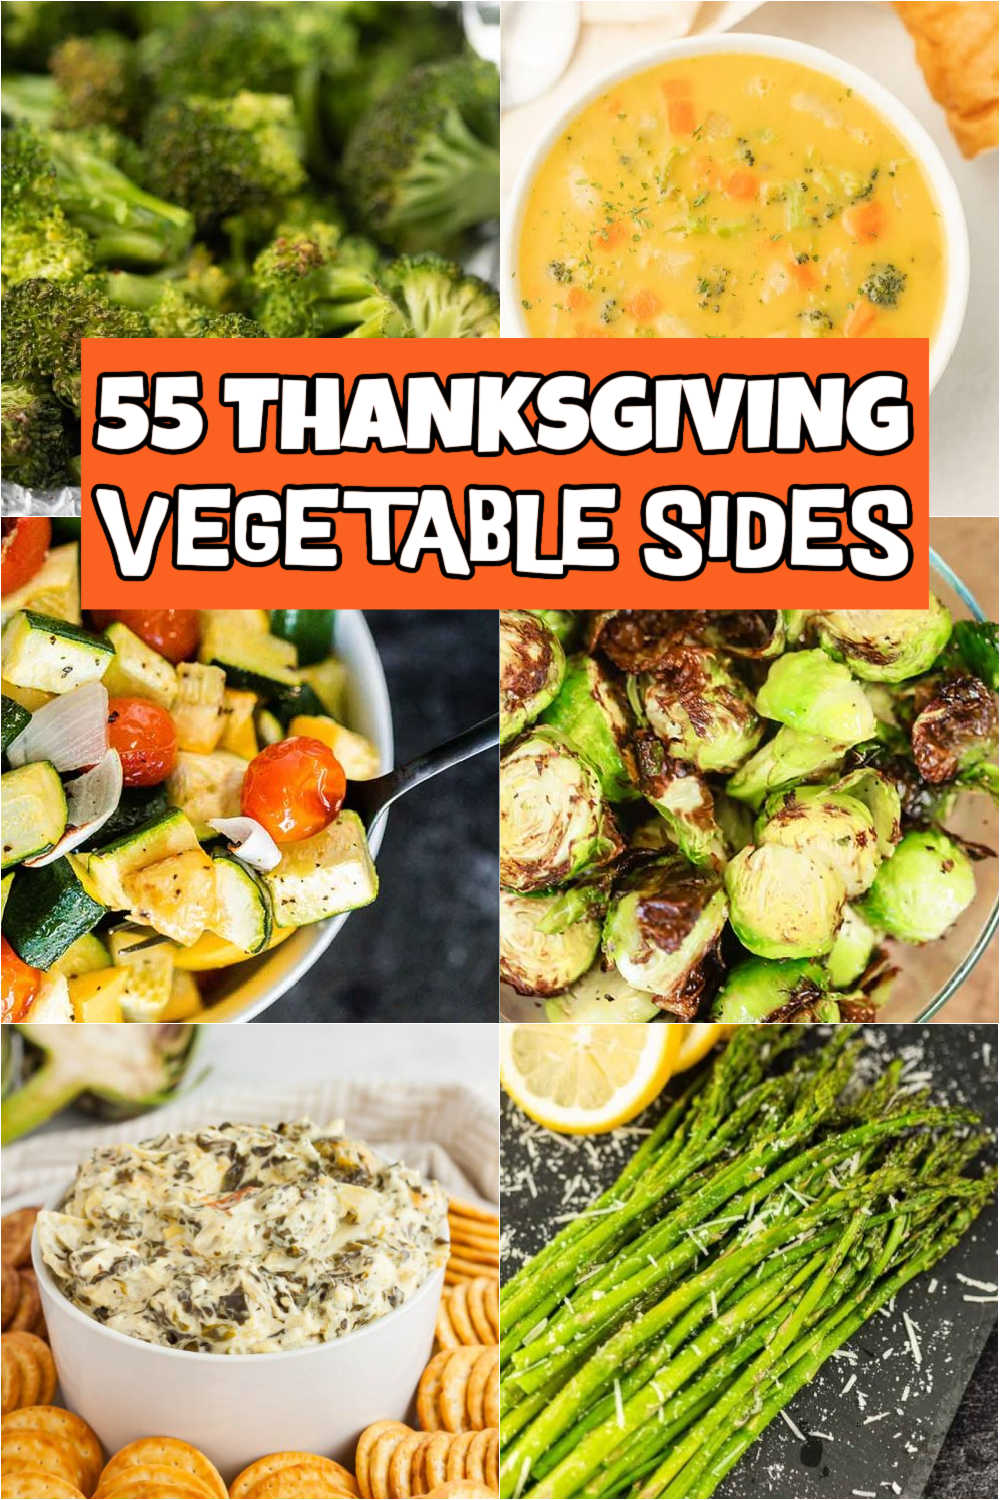 55 Thanksgiving Vegetable Sides - Eating on a Dime